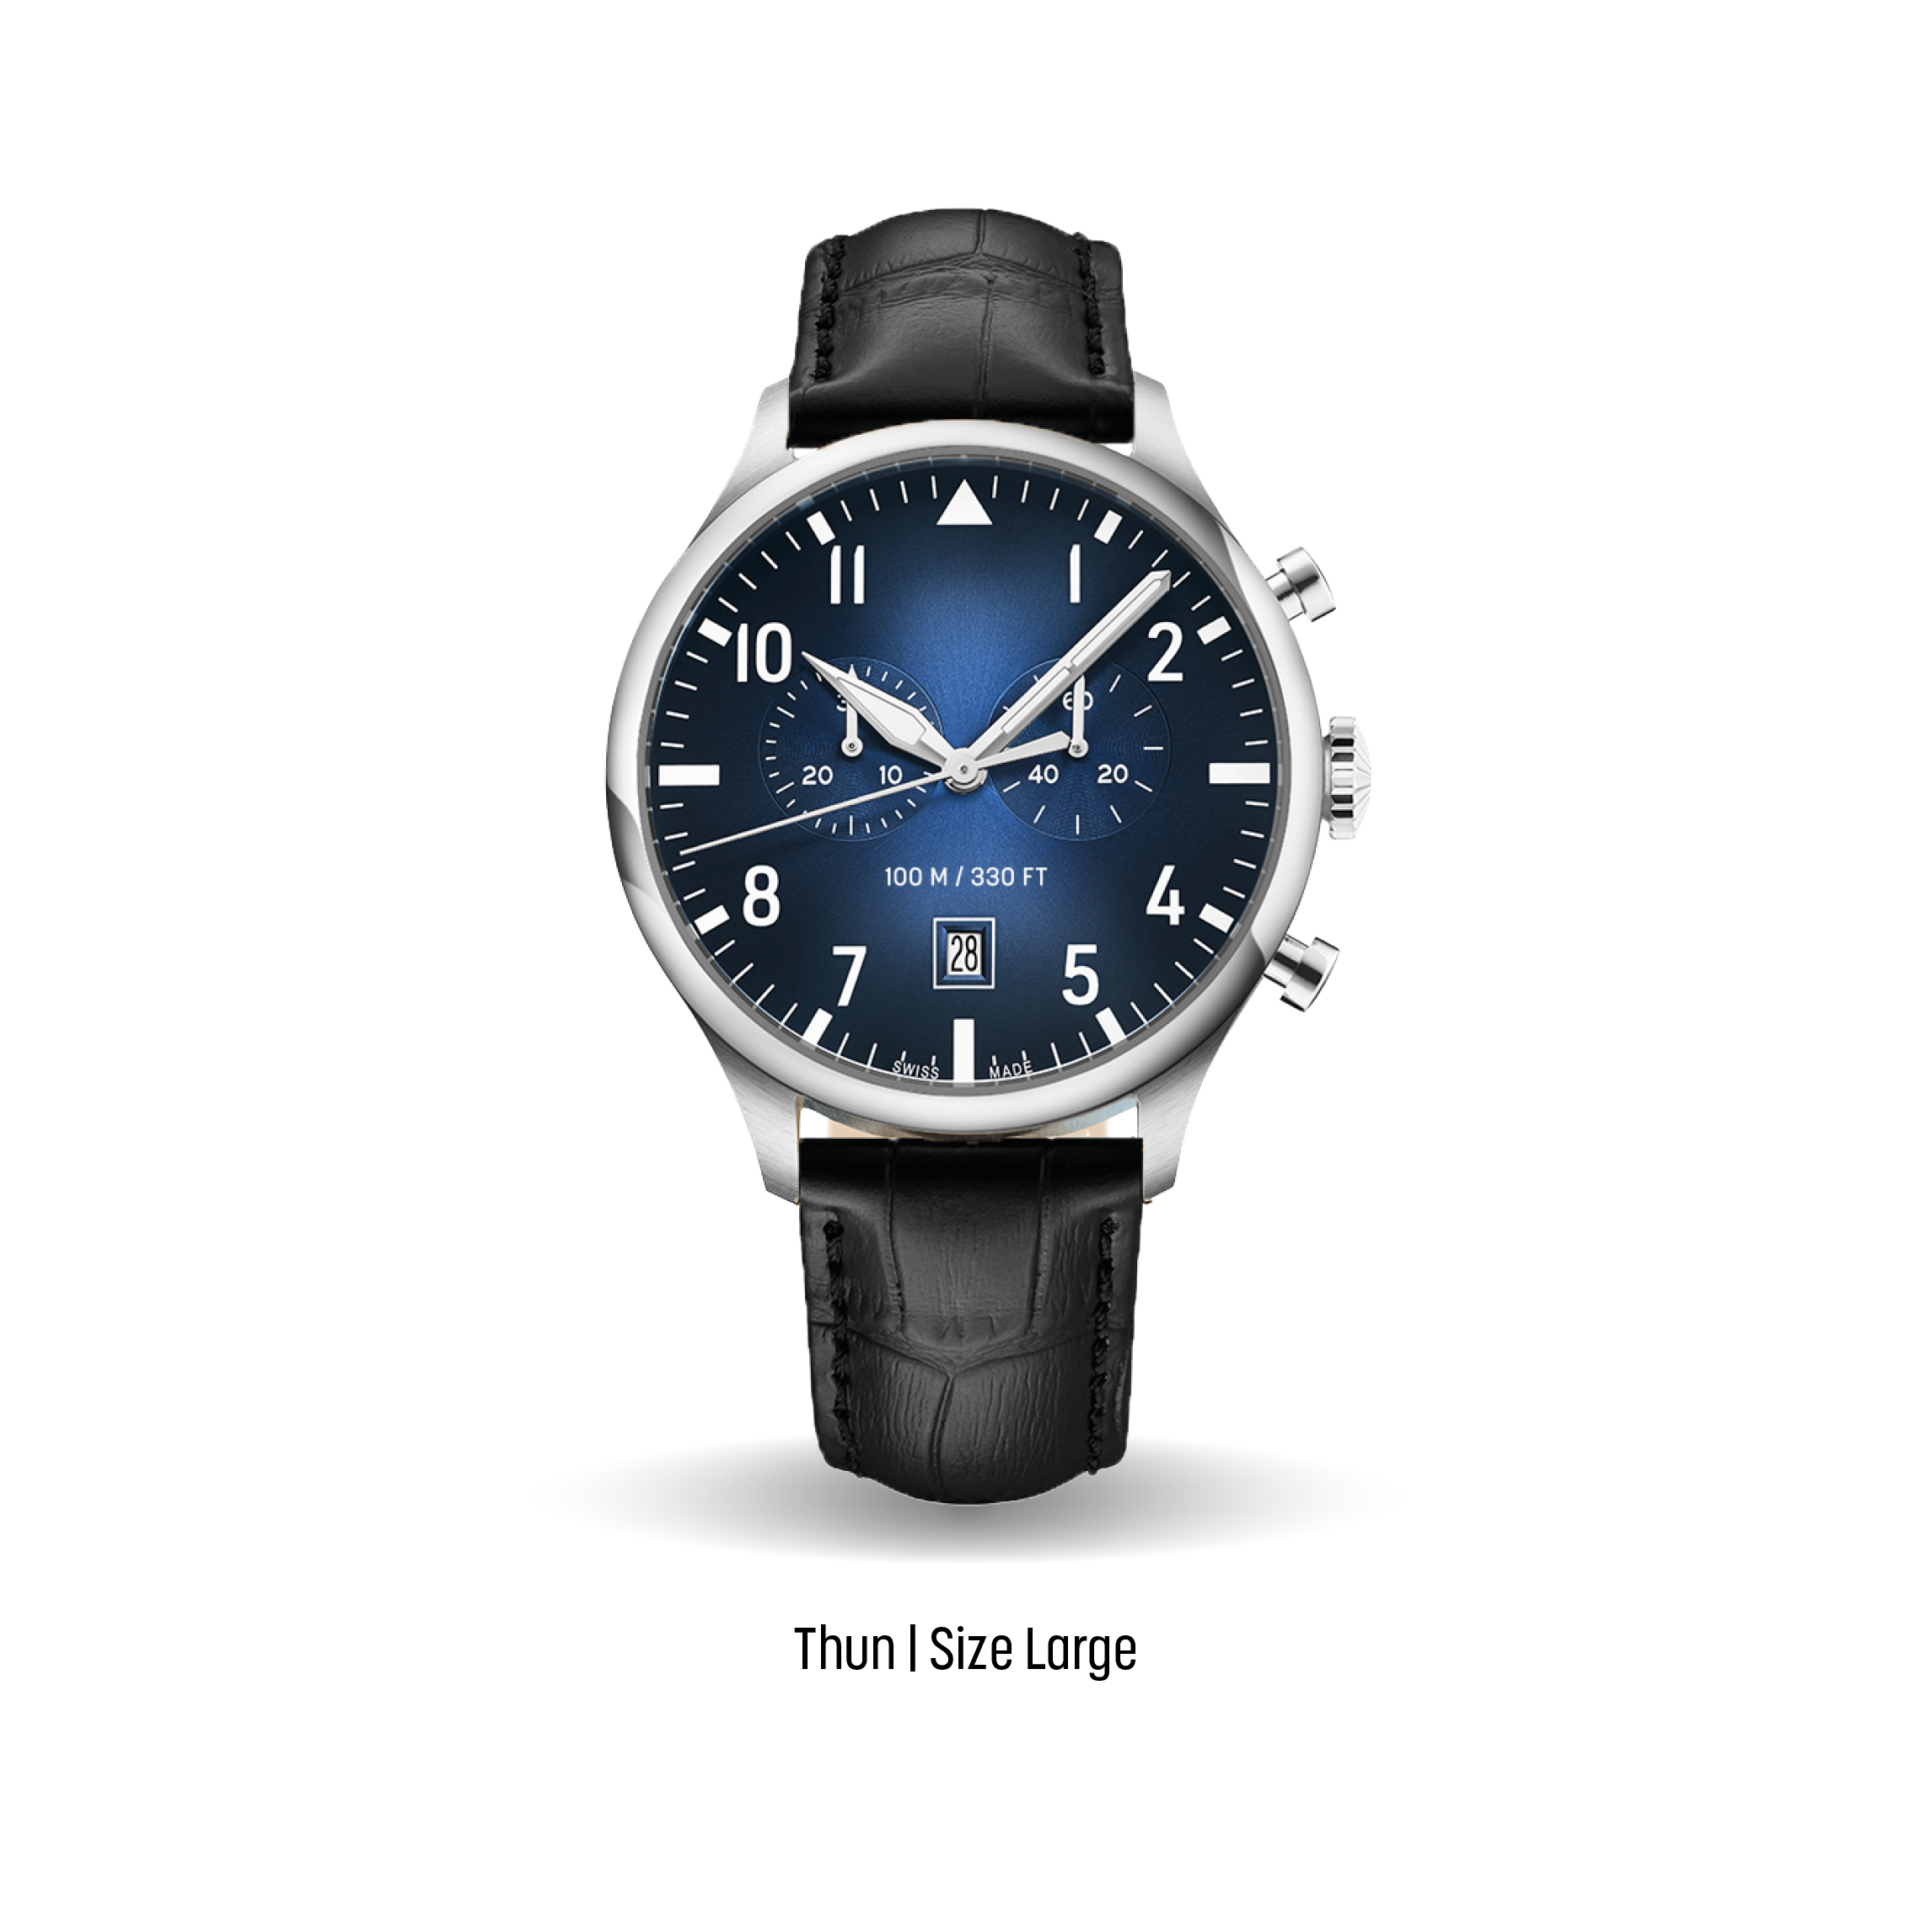 Swiss Made bespoke pilot watches by Watch Branding - ideal for corporate logo gifts to celebrate business milestone years